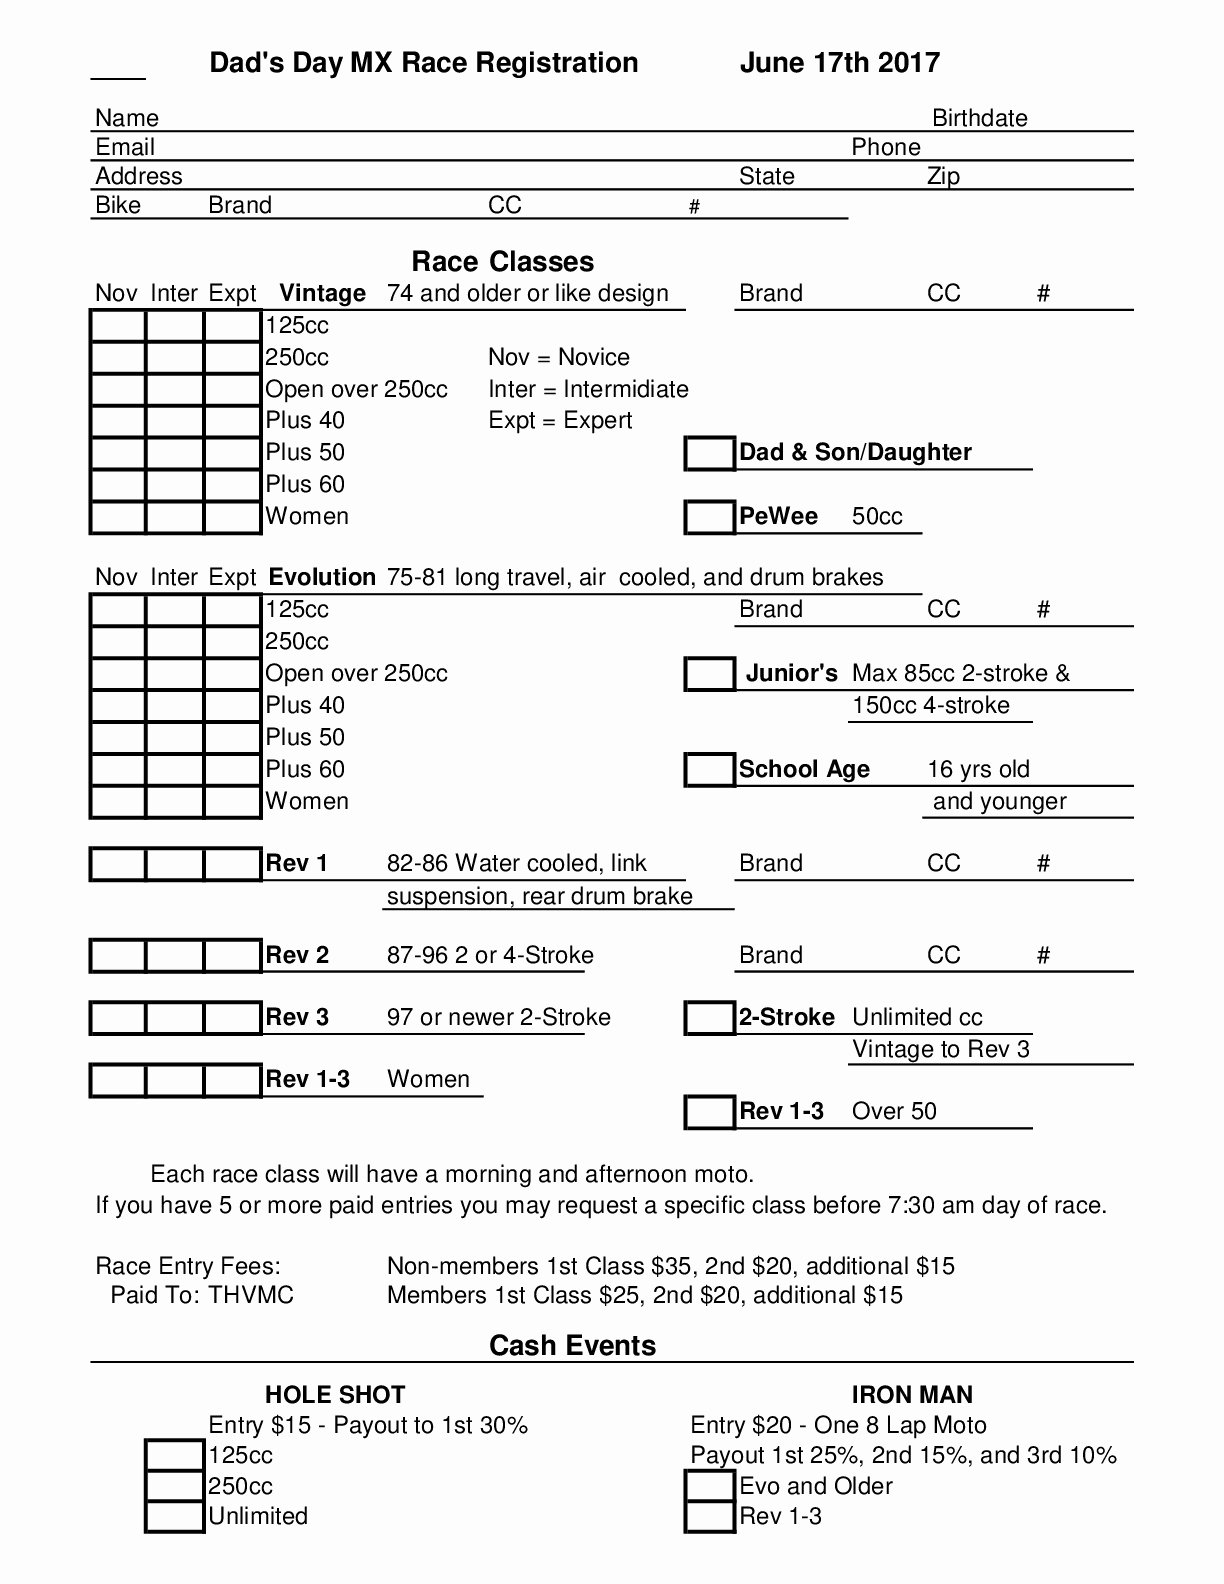 Race Registration form Awesome Dad’s Day Mx Race Registration form – Tieton Highlanders